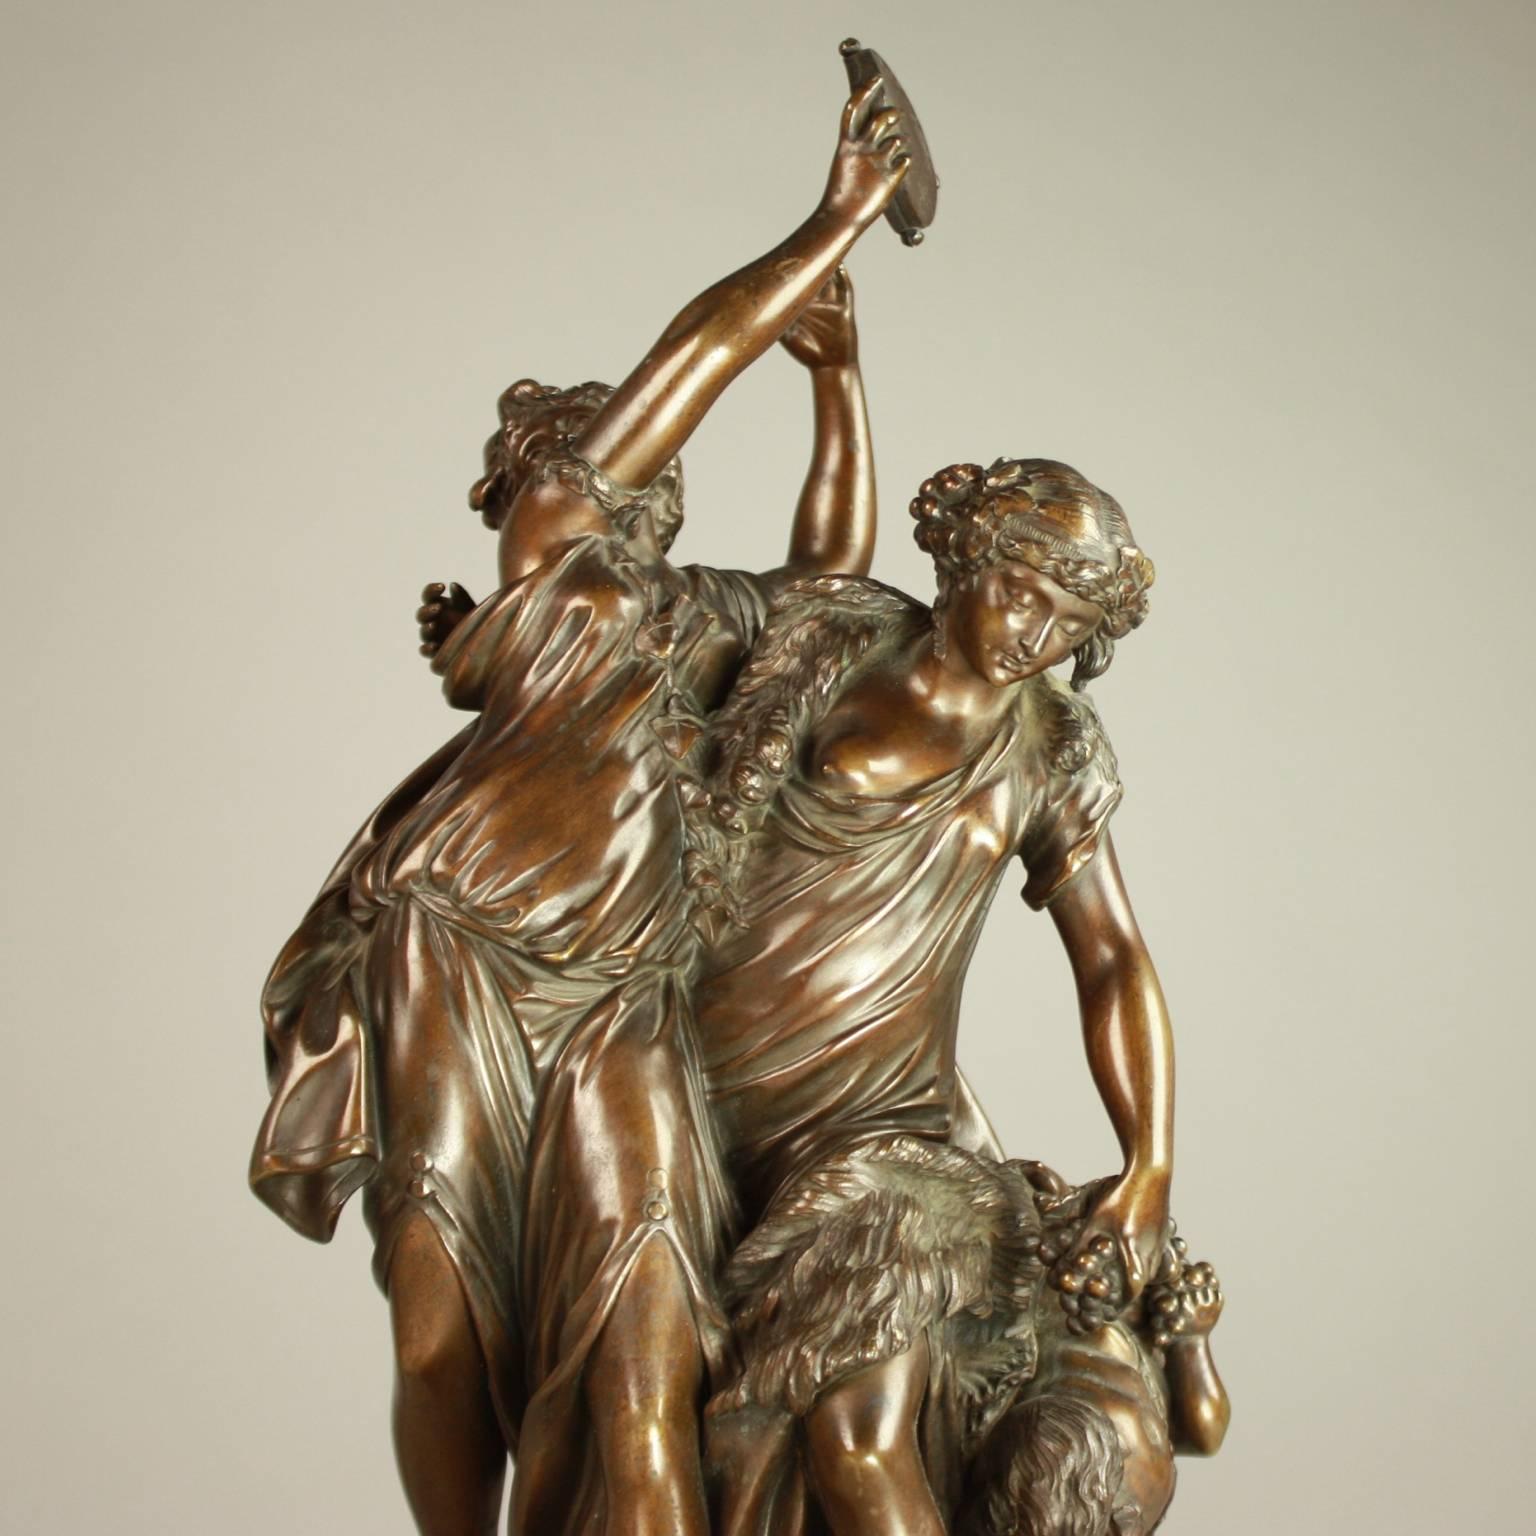 French Patinated Bronze Sculpture of Bacchanalia, after Clodion (19. Jahrhundert)